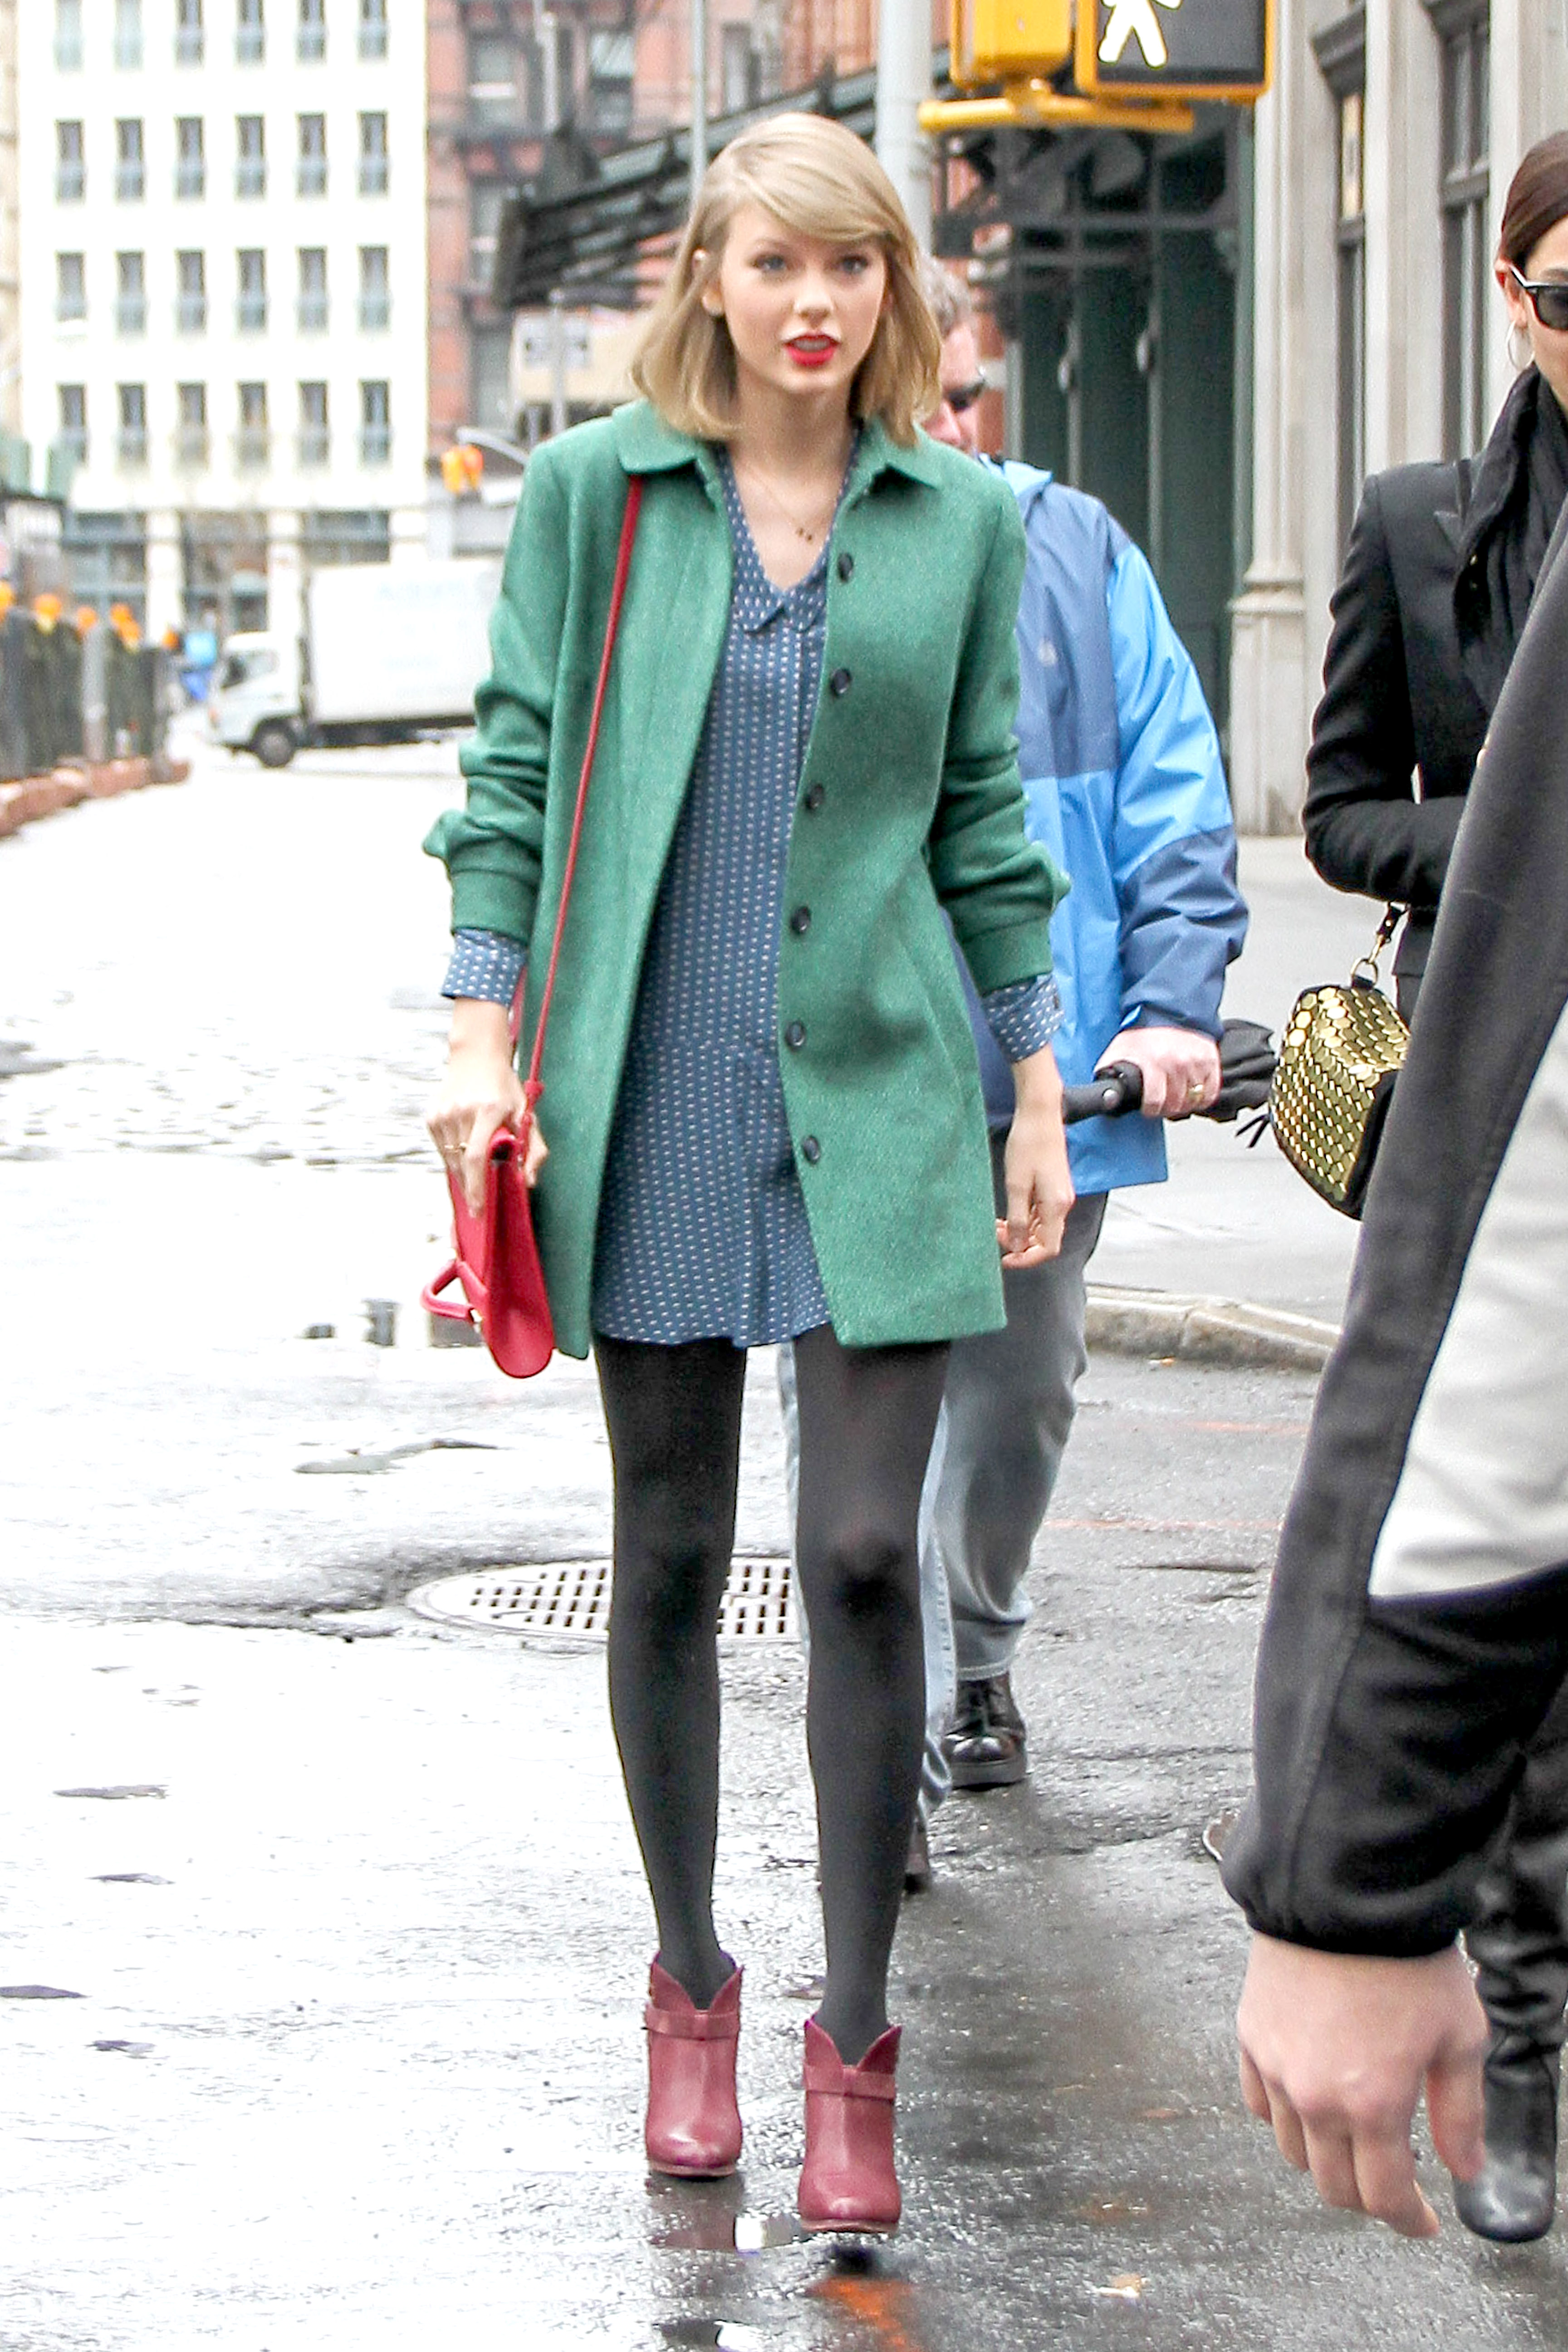 Taylor Swift Web Photo Gallery: Click image to close this window